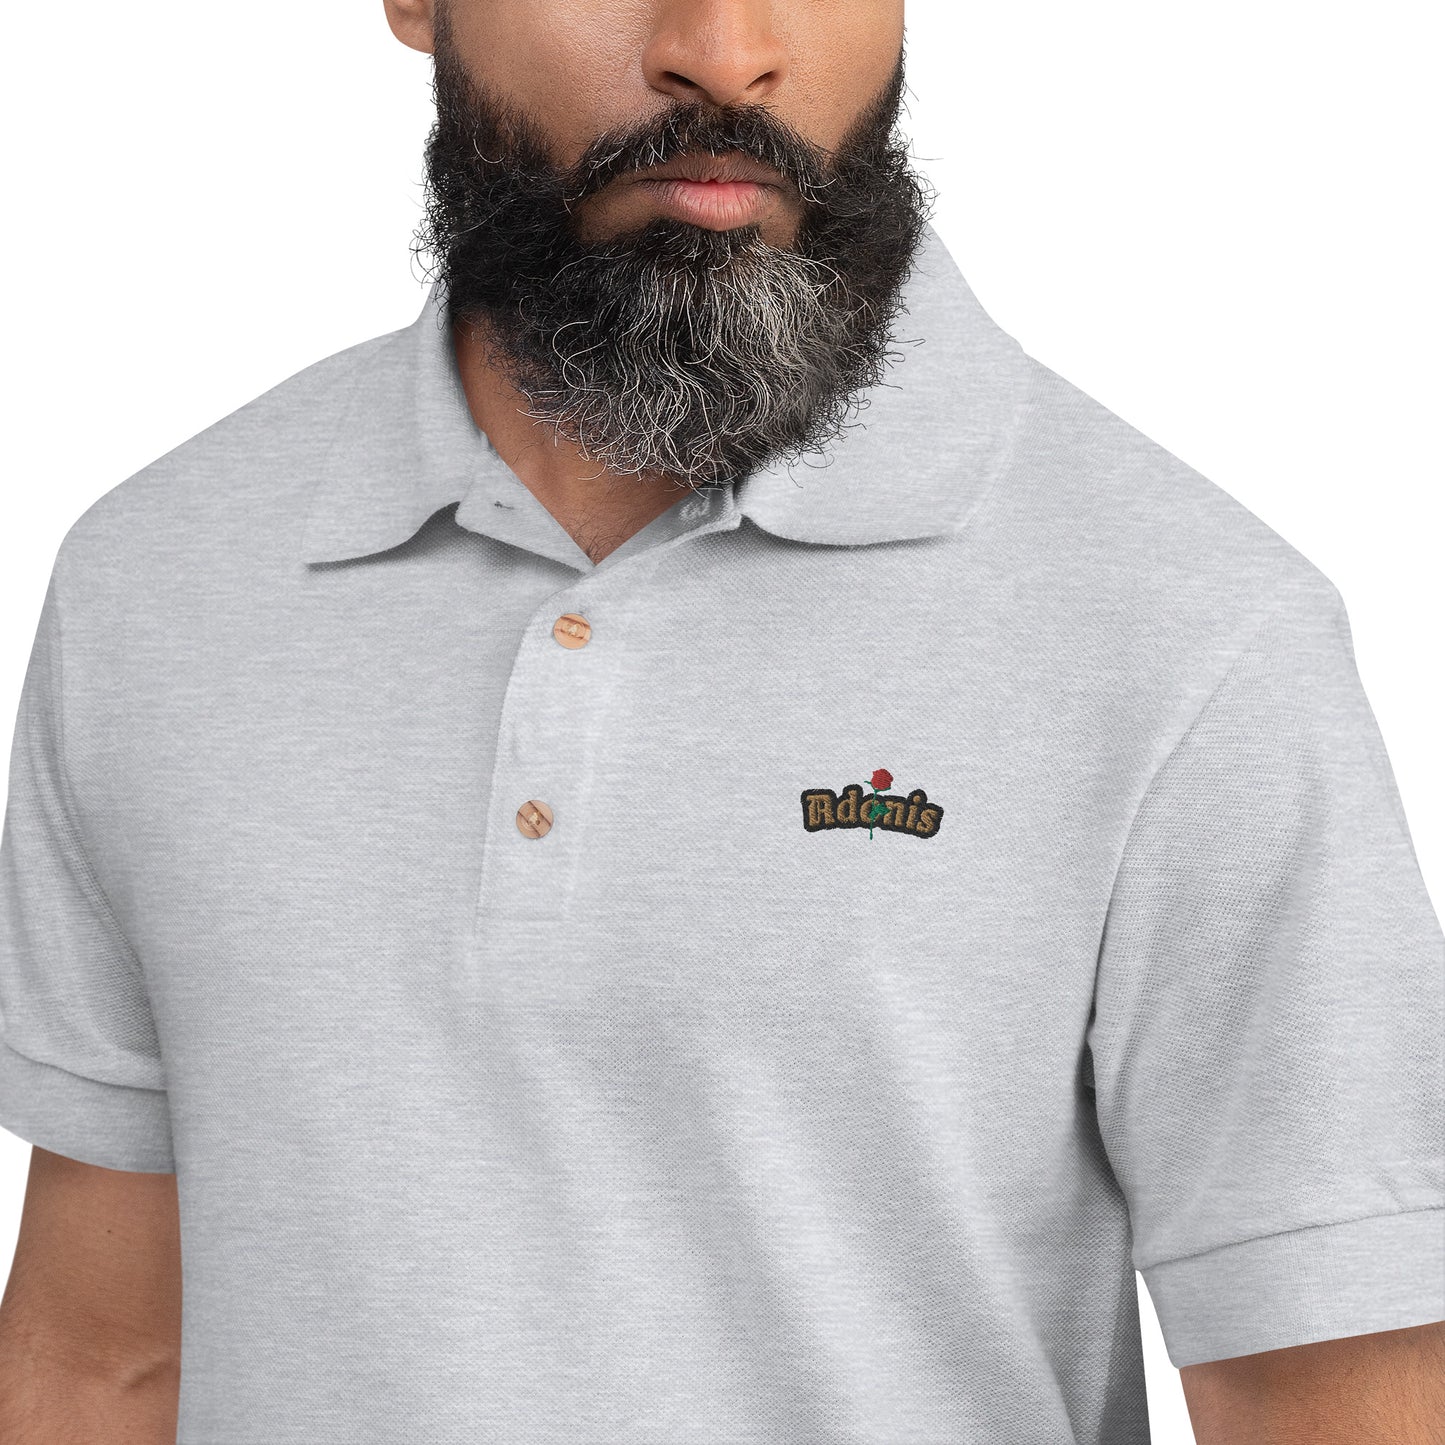 Adonis-Creations - Men's Embroidered Short Sleeve Polo